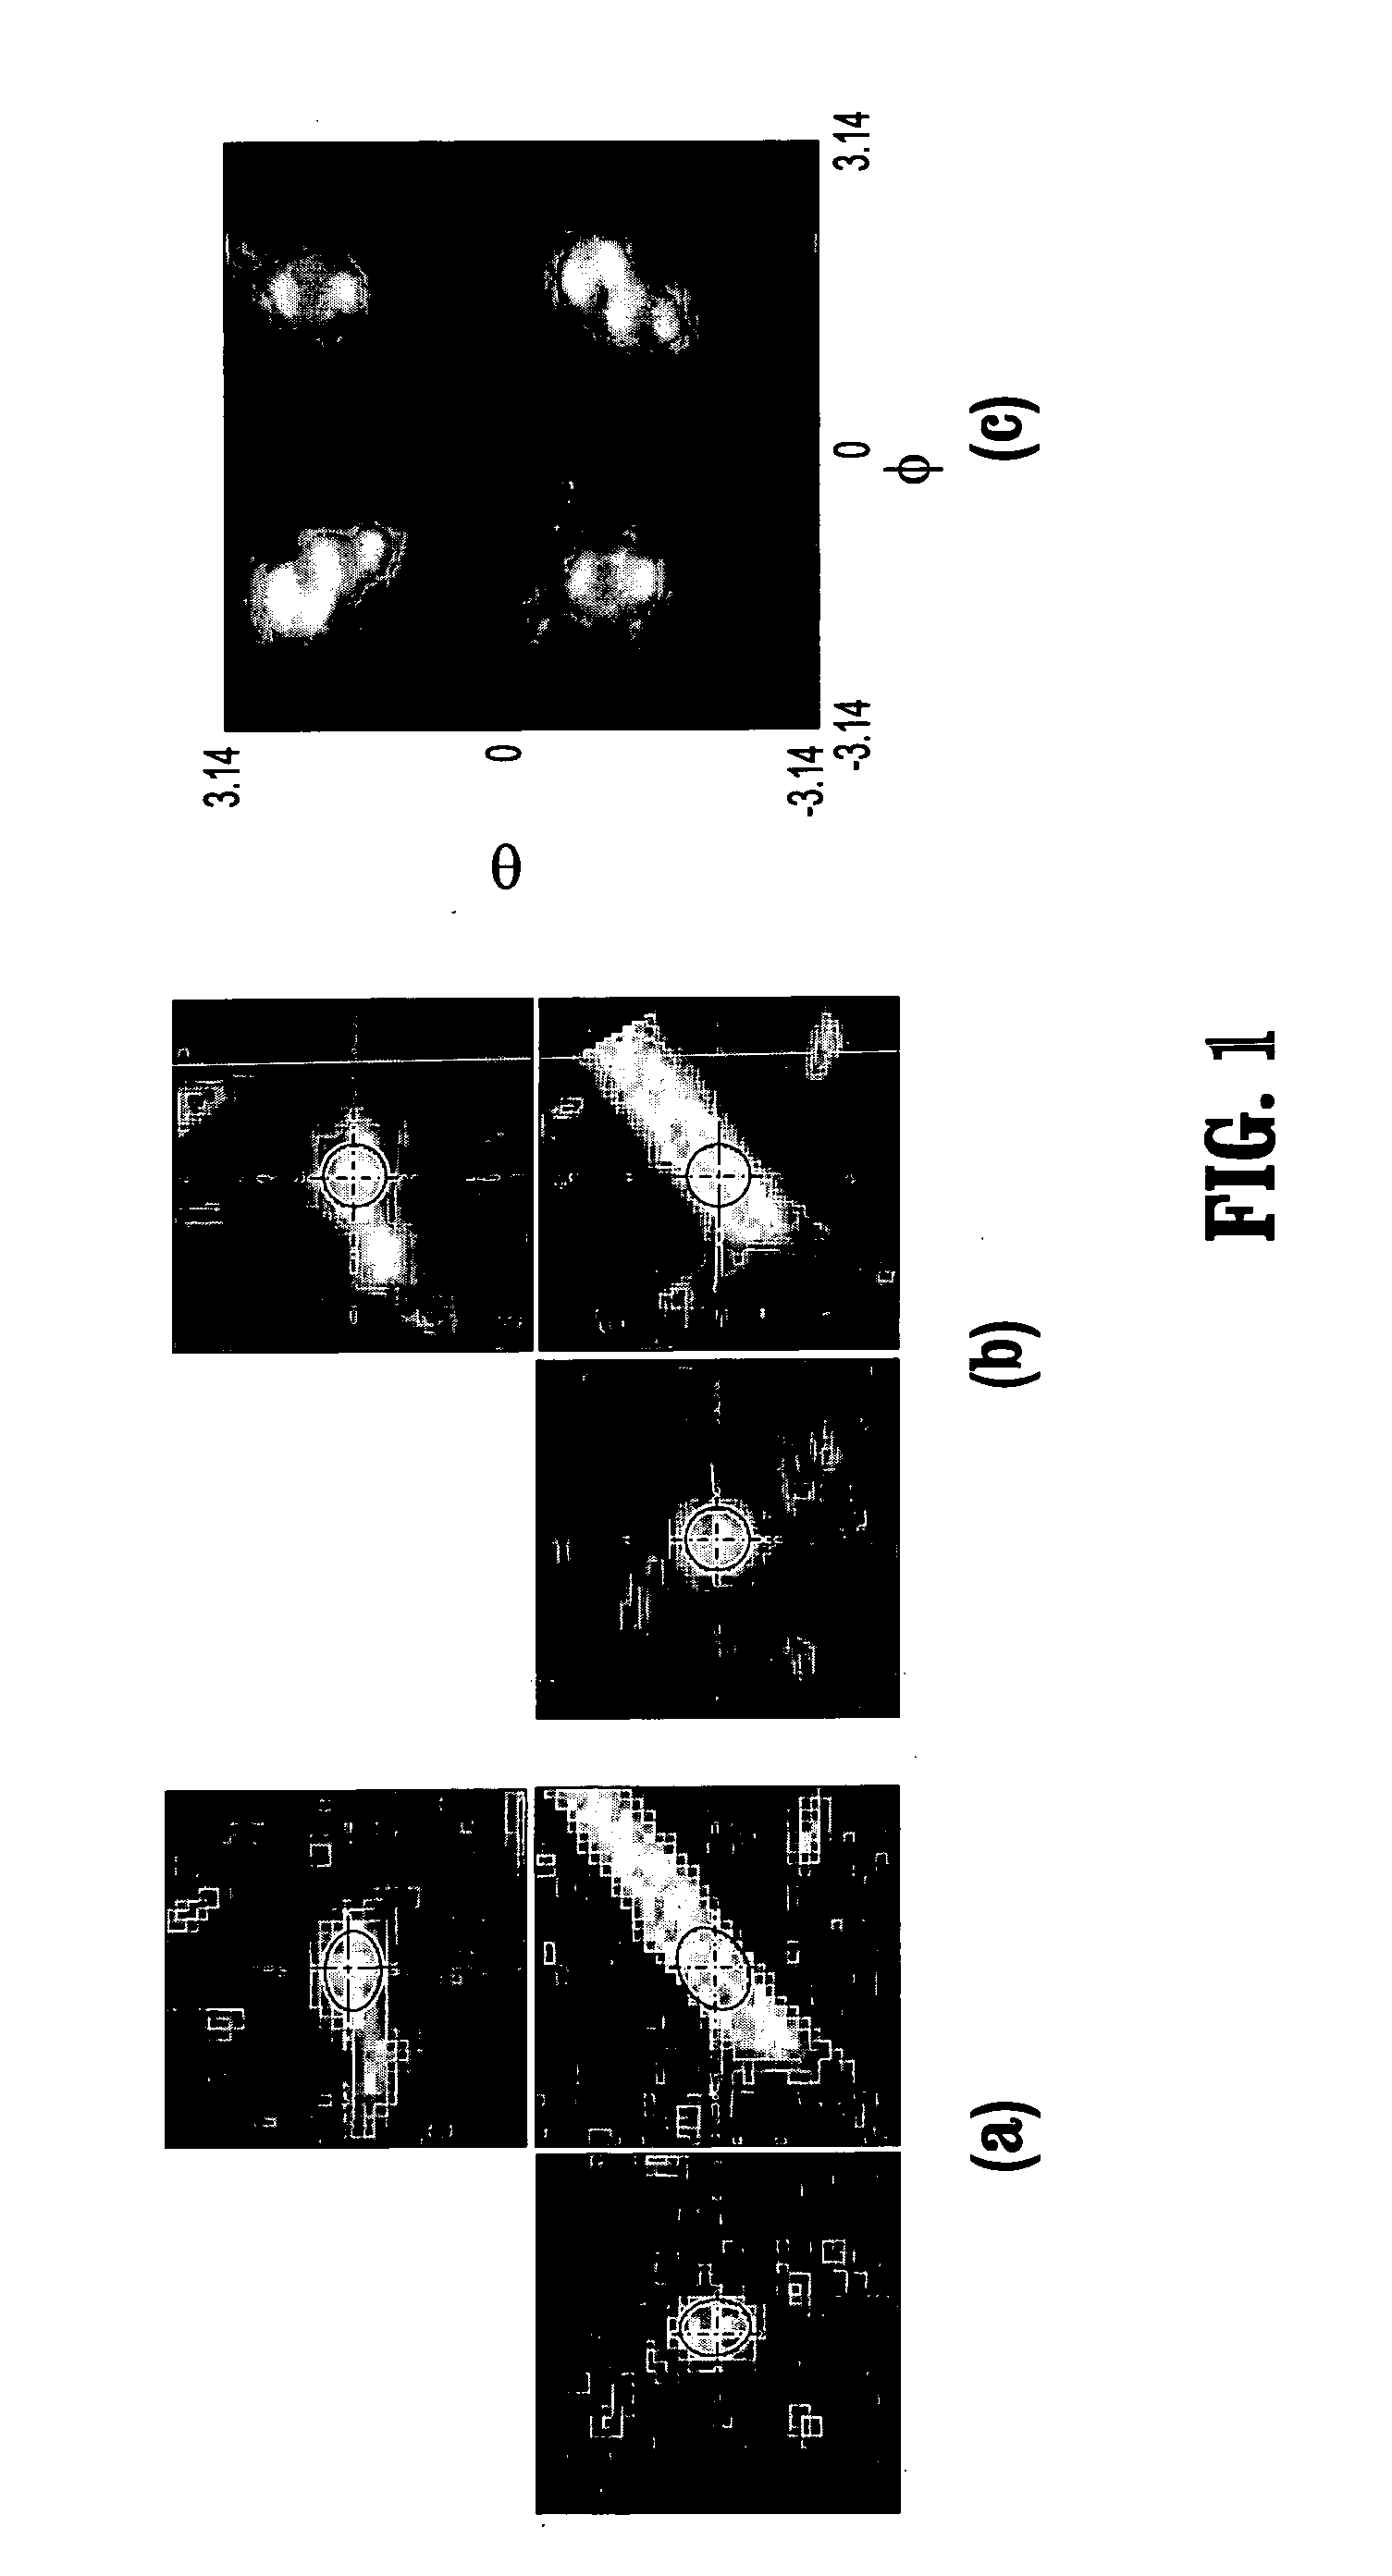 System and method for local pulmonary structure classification for computer-aided nodule detection